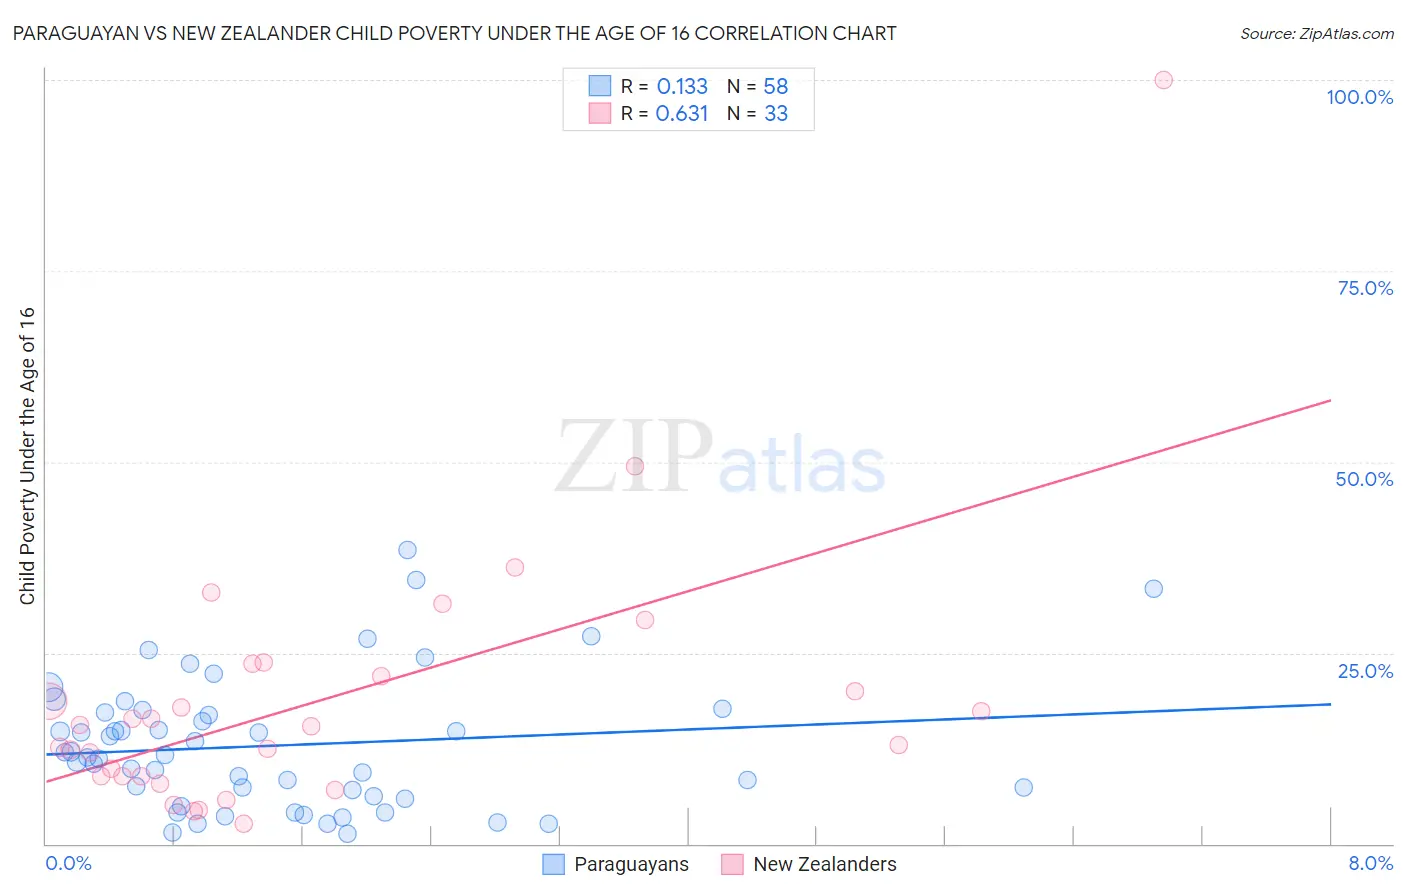 Paraguayan vs New Zealander Child Poverty Under the Age of 16